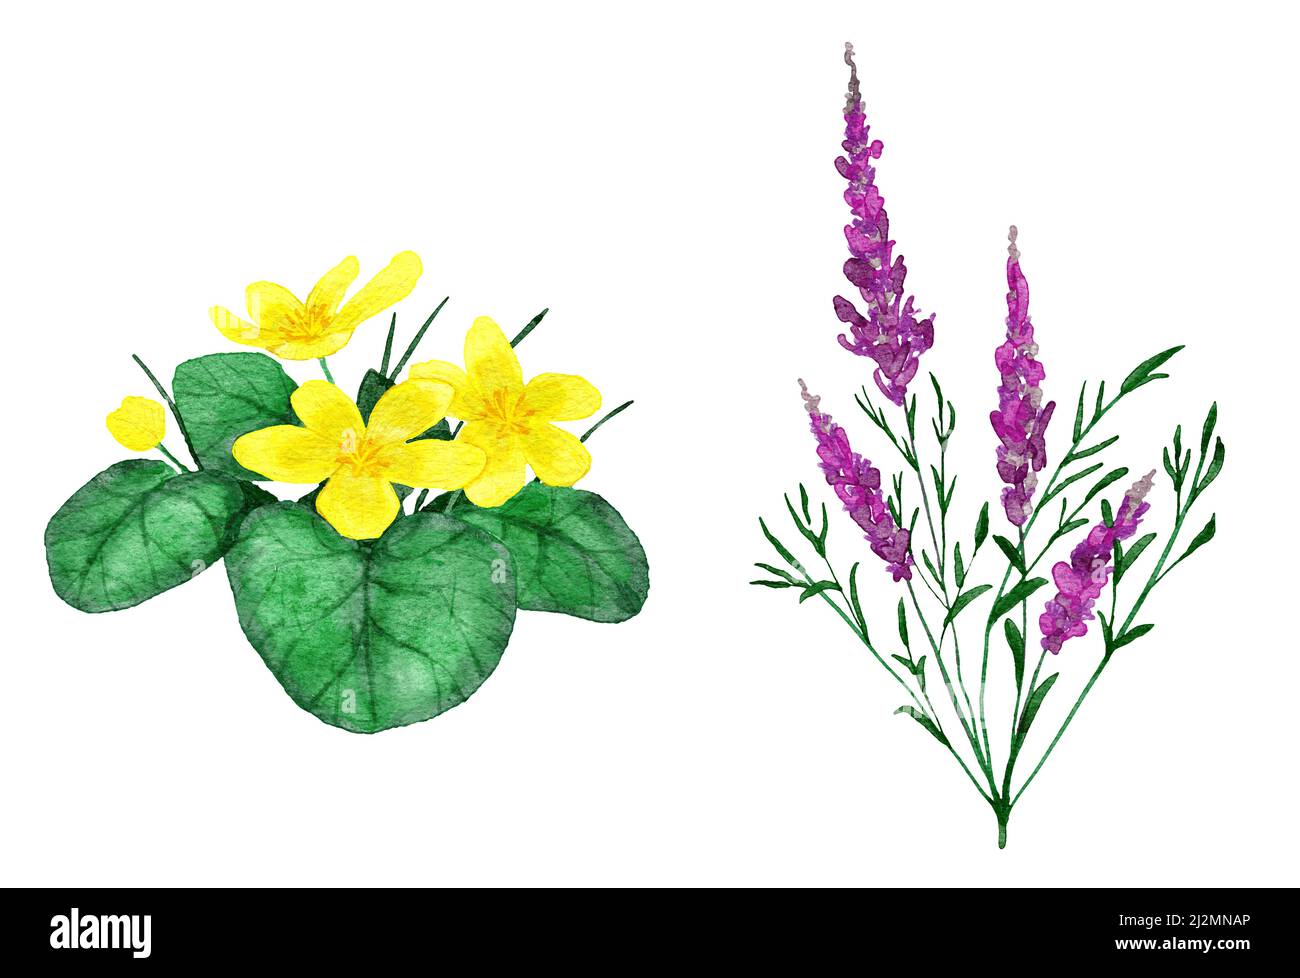 Watercolor hand drawn illustration of purple pink willowherb chamaenerion and yellow trollius flowers. Floral natural wildflower river lake forest landscape. Organic bloom leaf leaves plants herbs Stock Photo